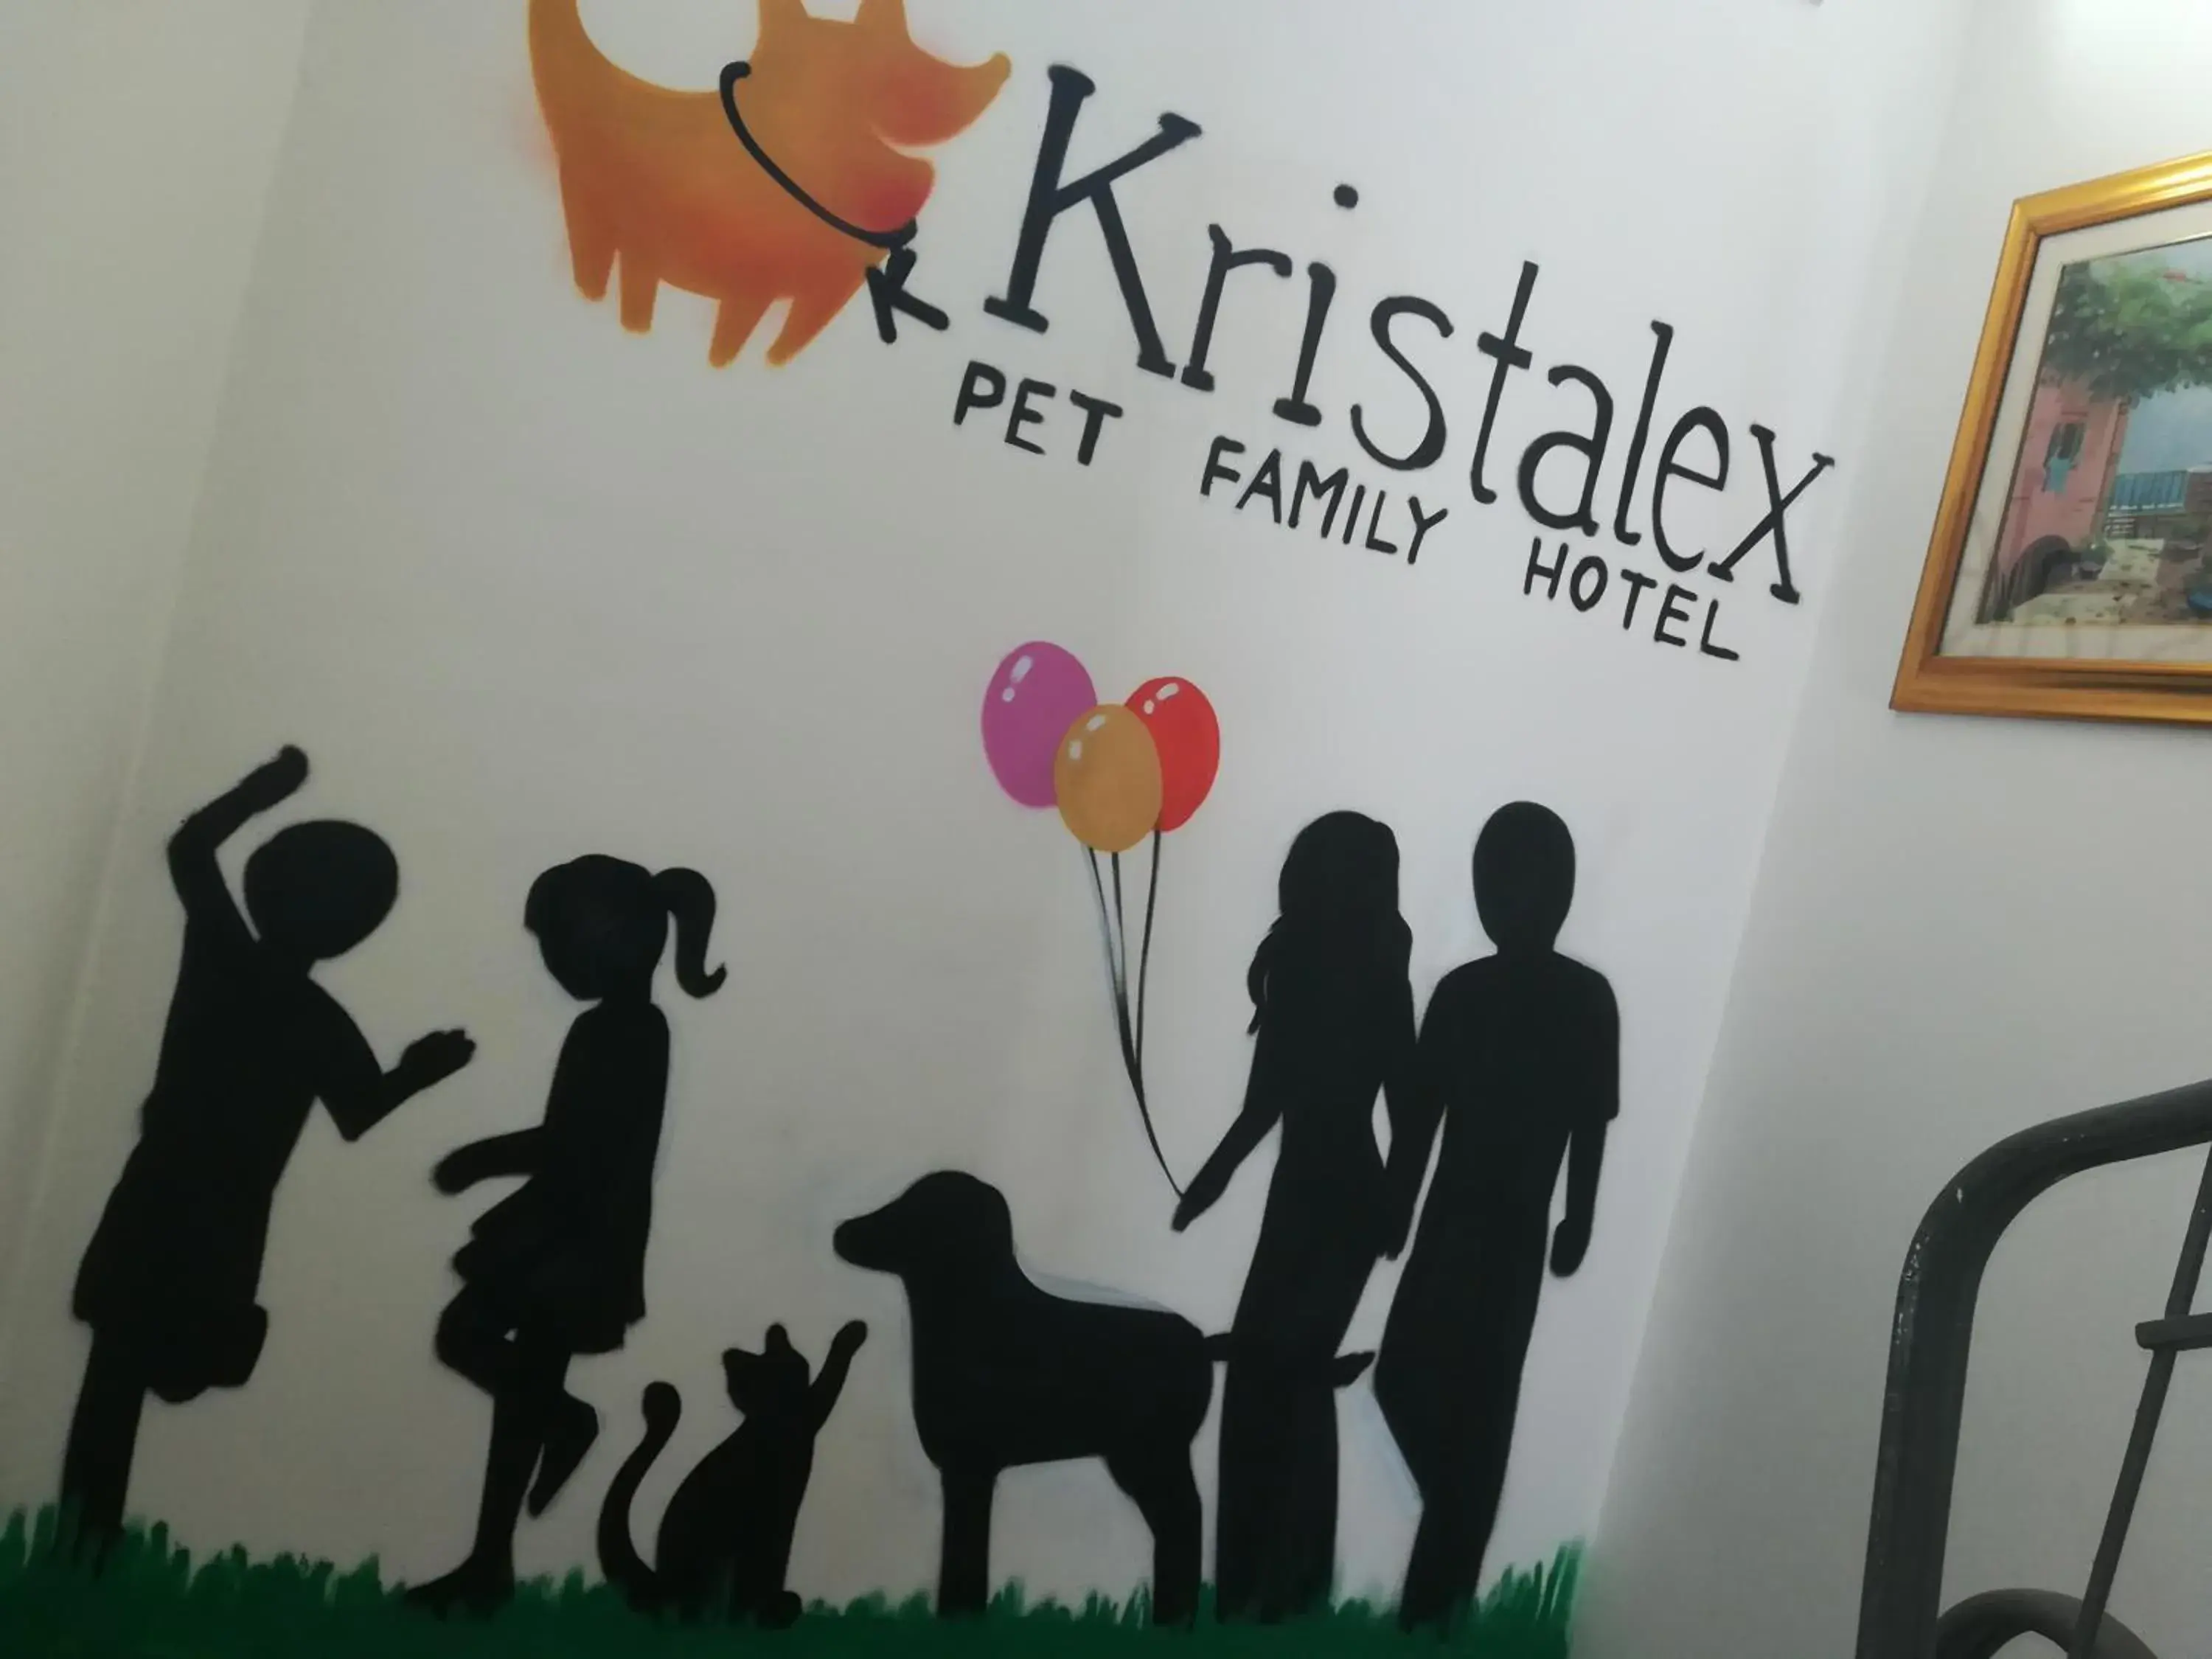 Property logo or sign in Kristalex Pet Family Hotel